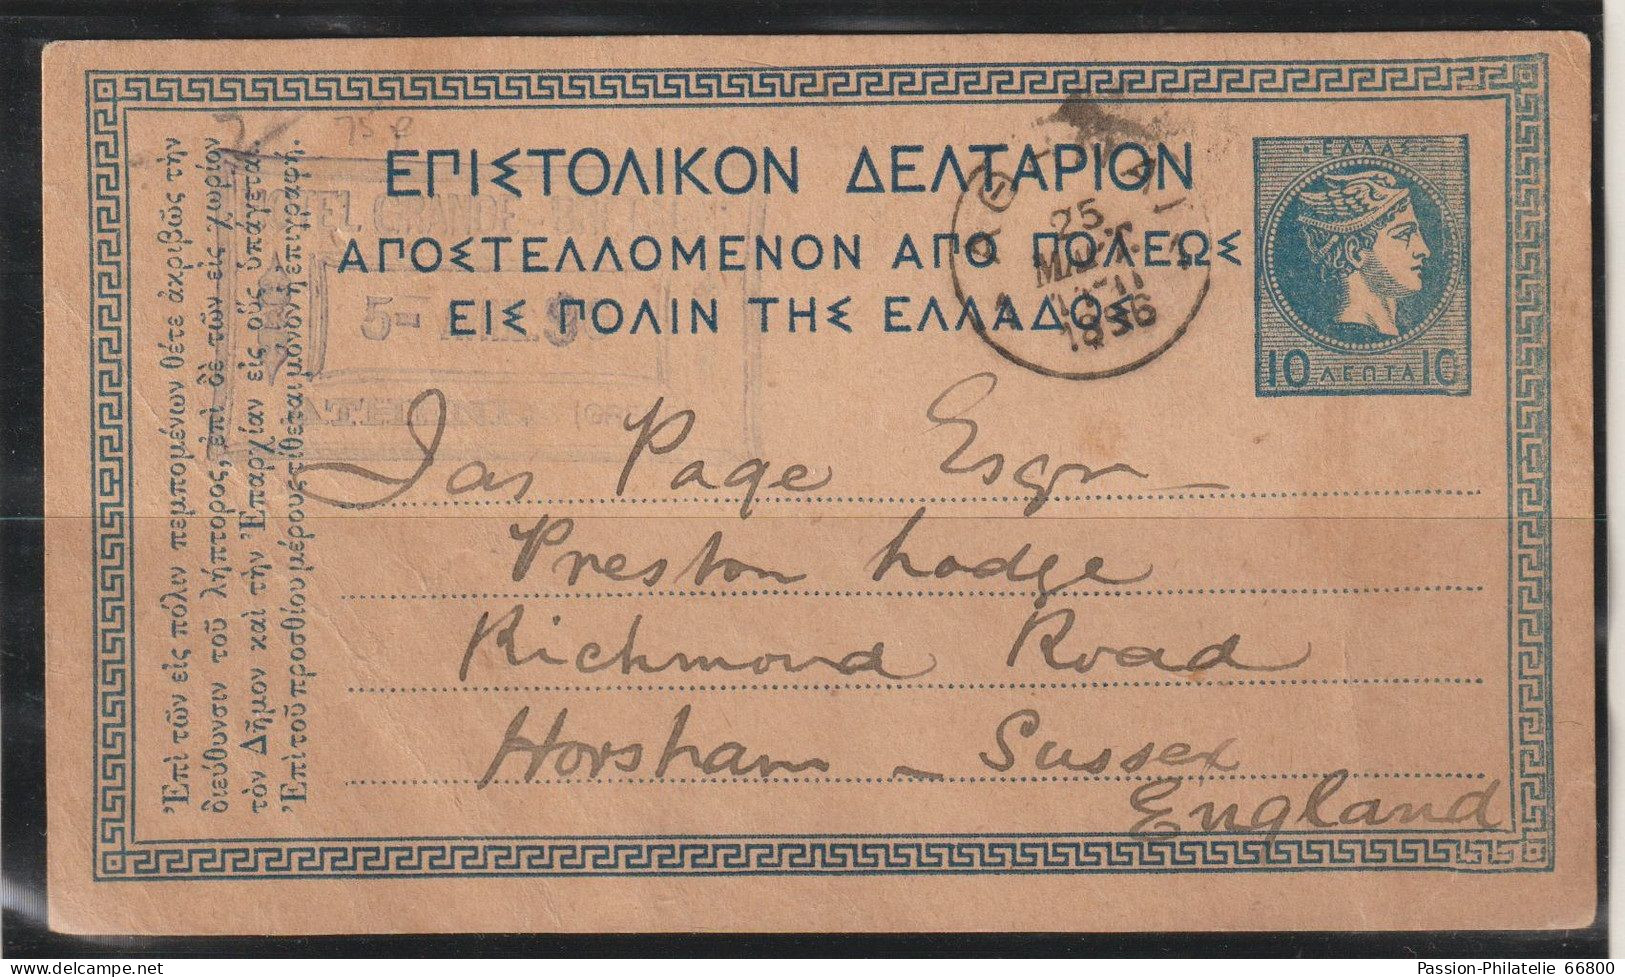 Greece Exhibition Sheet: Postal Stationary From 1986 Posted The Opening Day Of The 1896 Olympic Games In Athens - Summer 1896: Athens